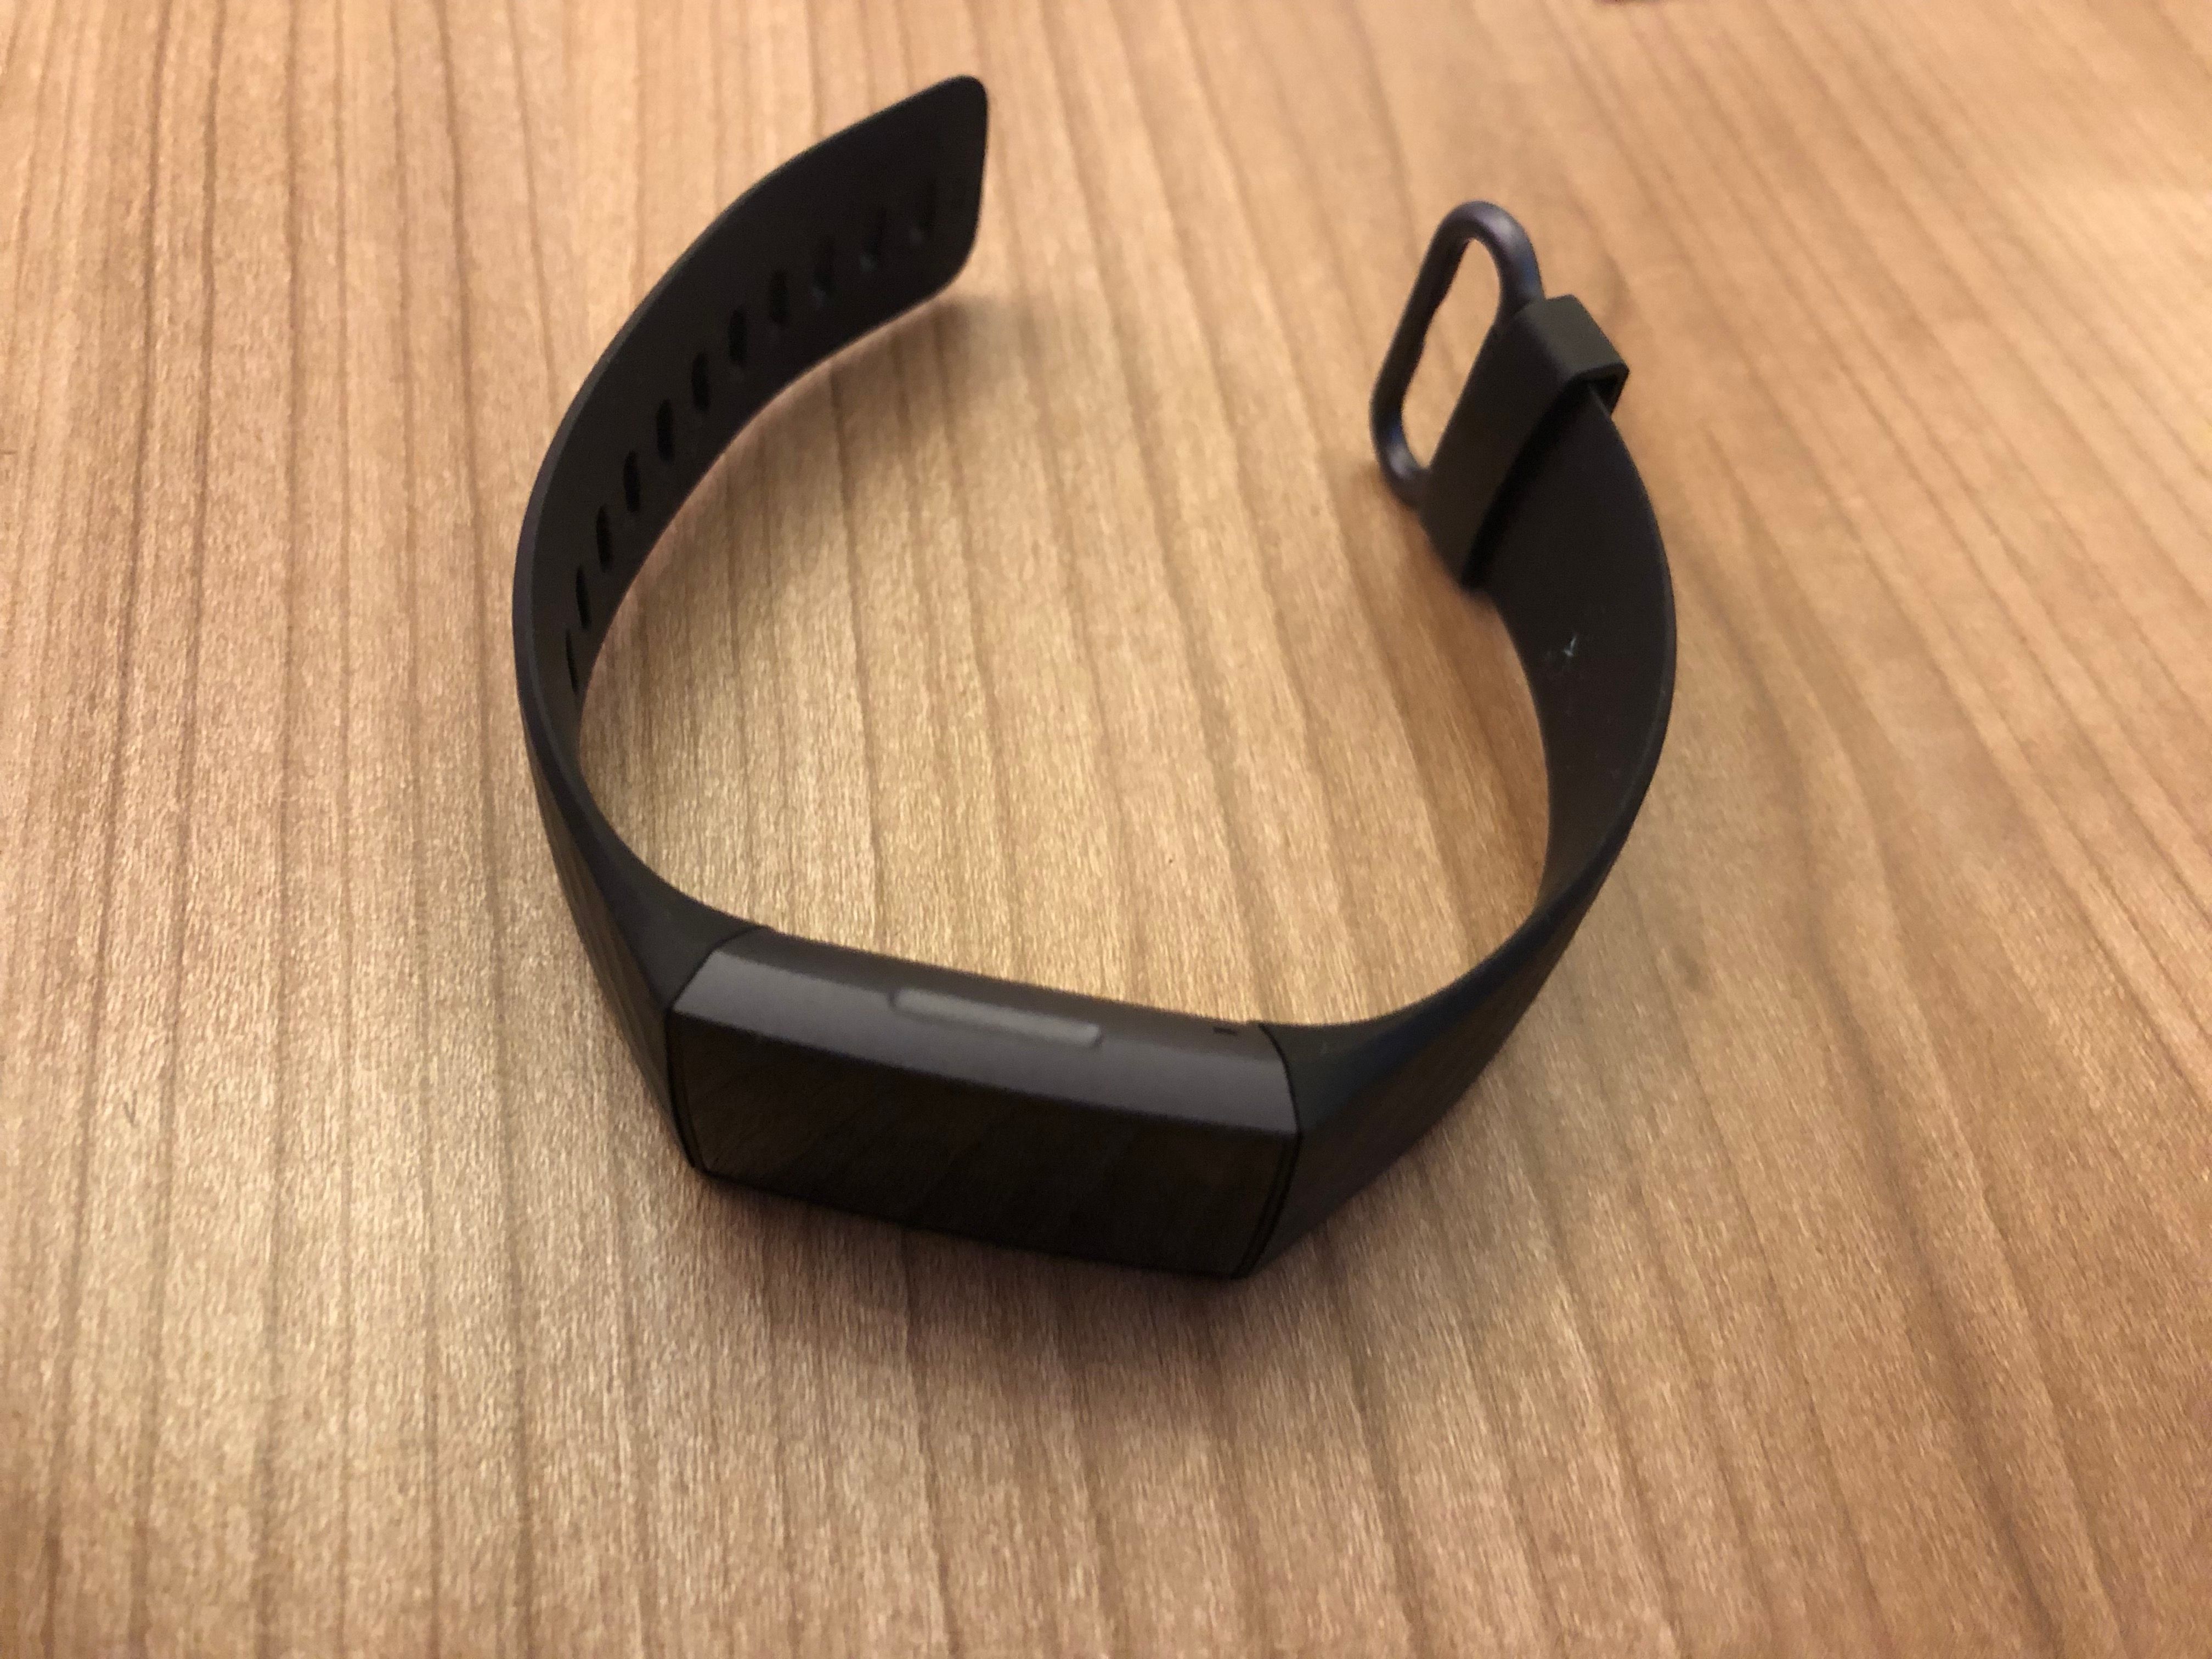 Solved: Charge 3 blank display - Fitbit 